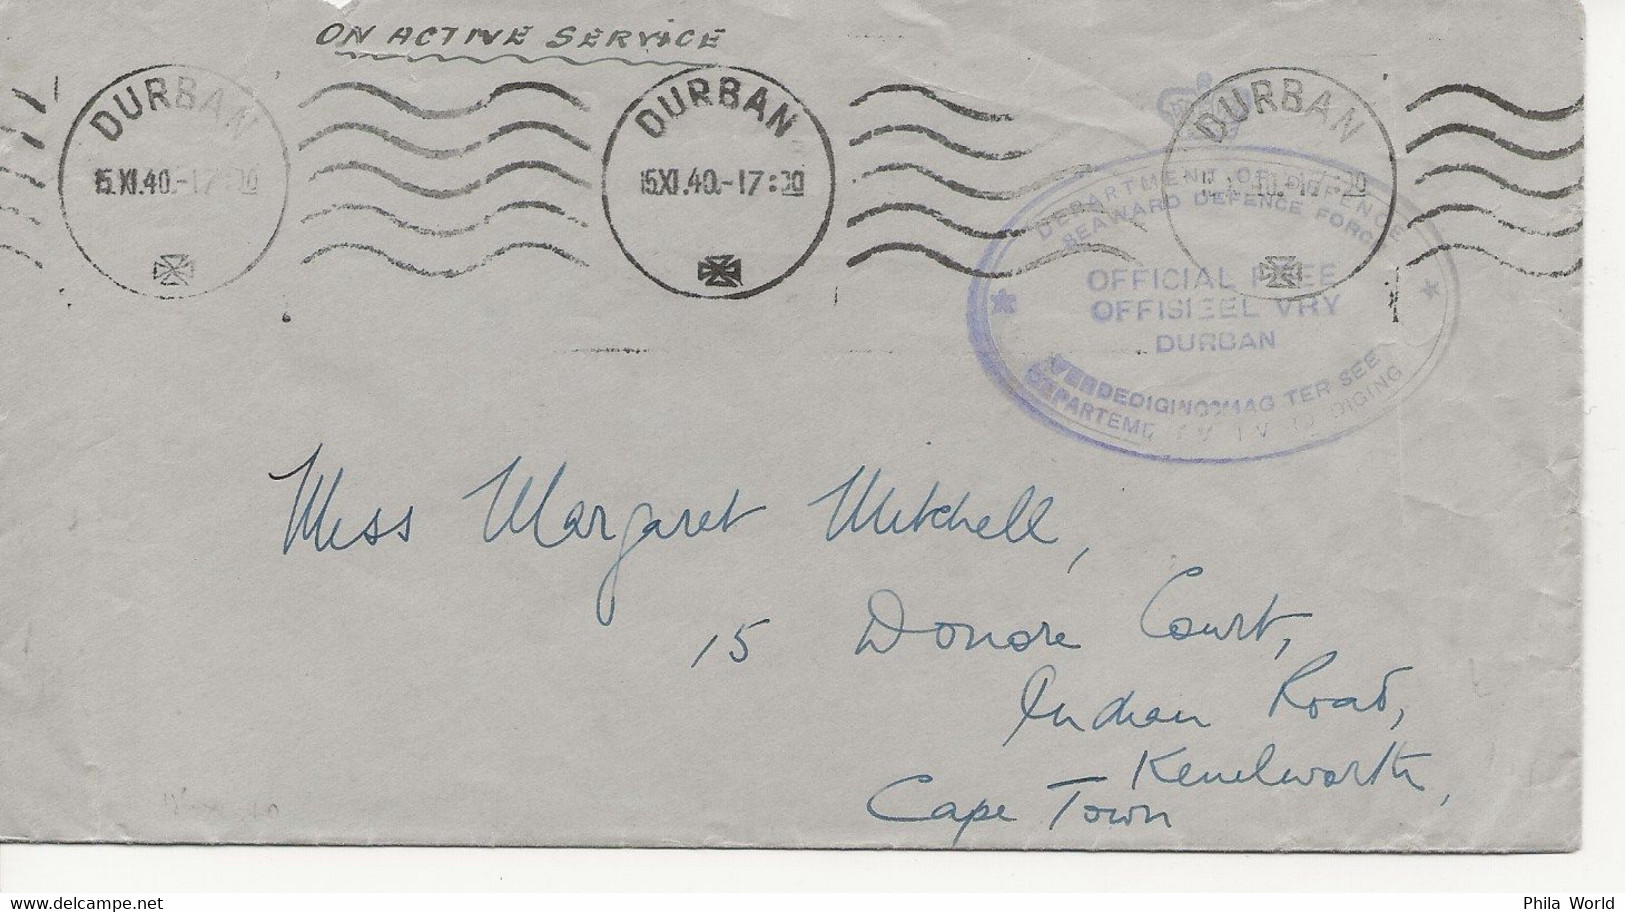 WW2 ON ACTIVE SERVICE NOV 1940 OFFICIAL FREE CACHET On COVER From DURBAN To CAPE TOWN South Africa - Bateaux